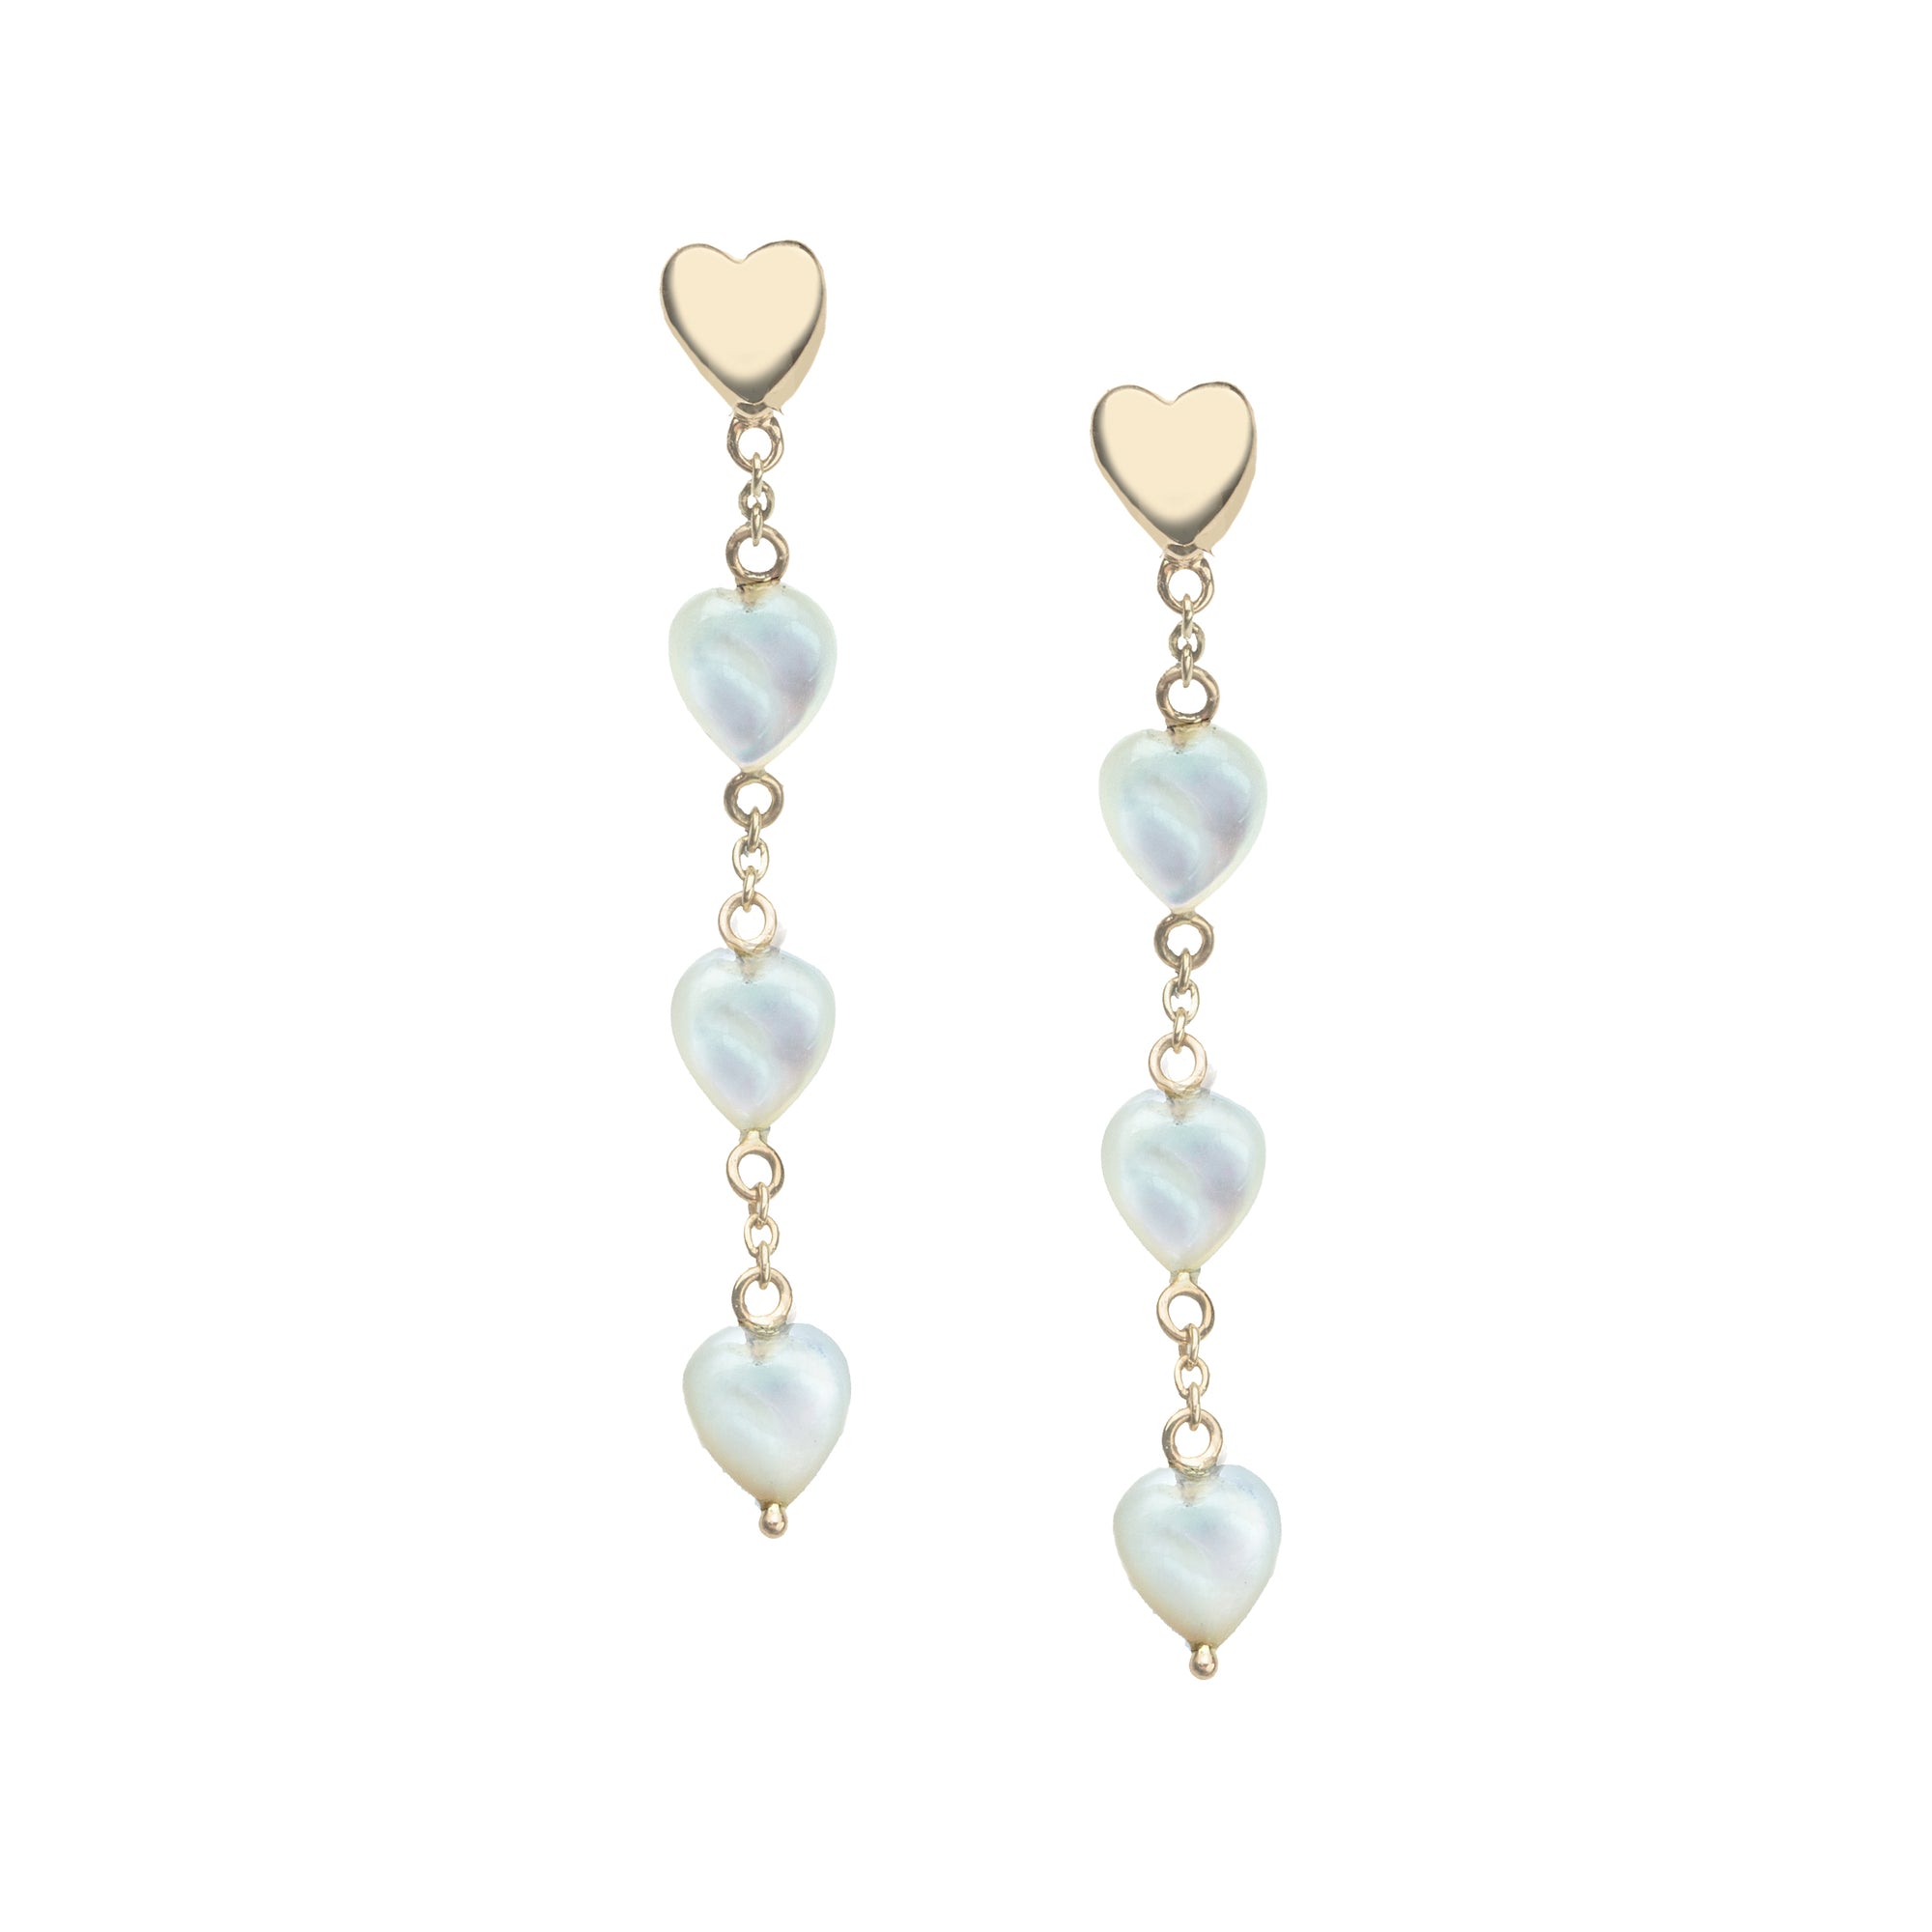 LOVE Carved Mother of Pearl and Gold Heart Earrings